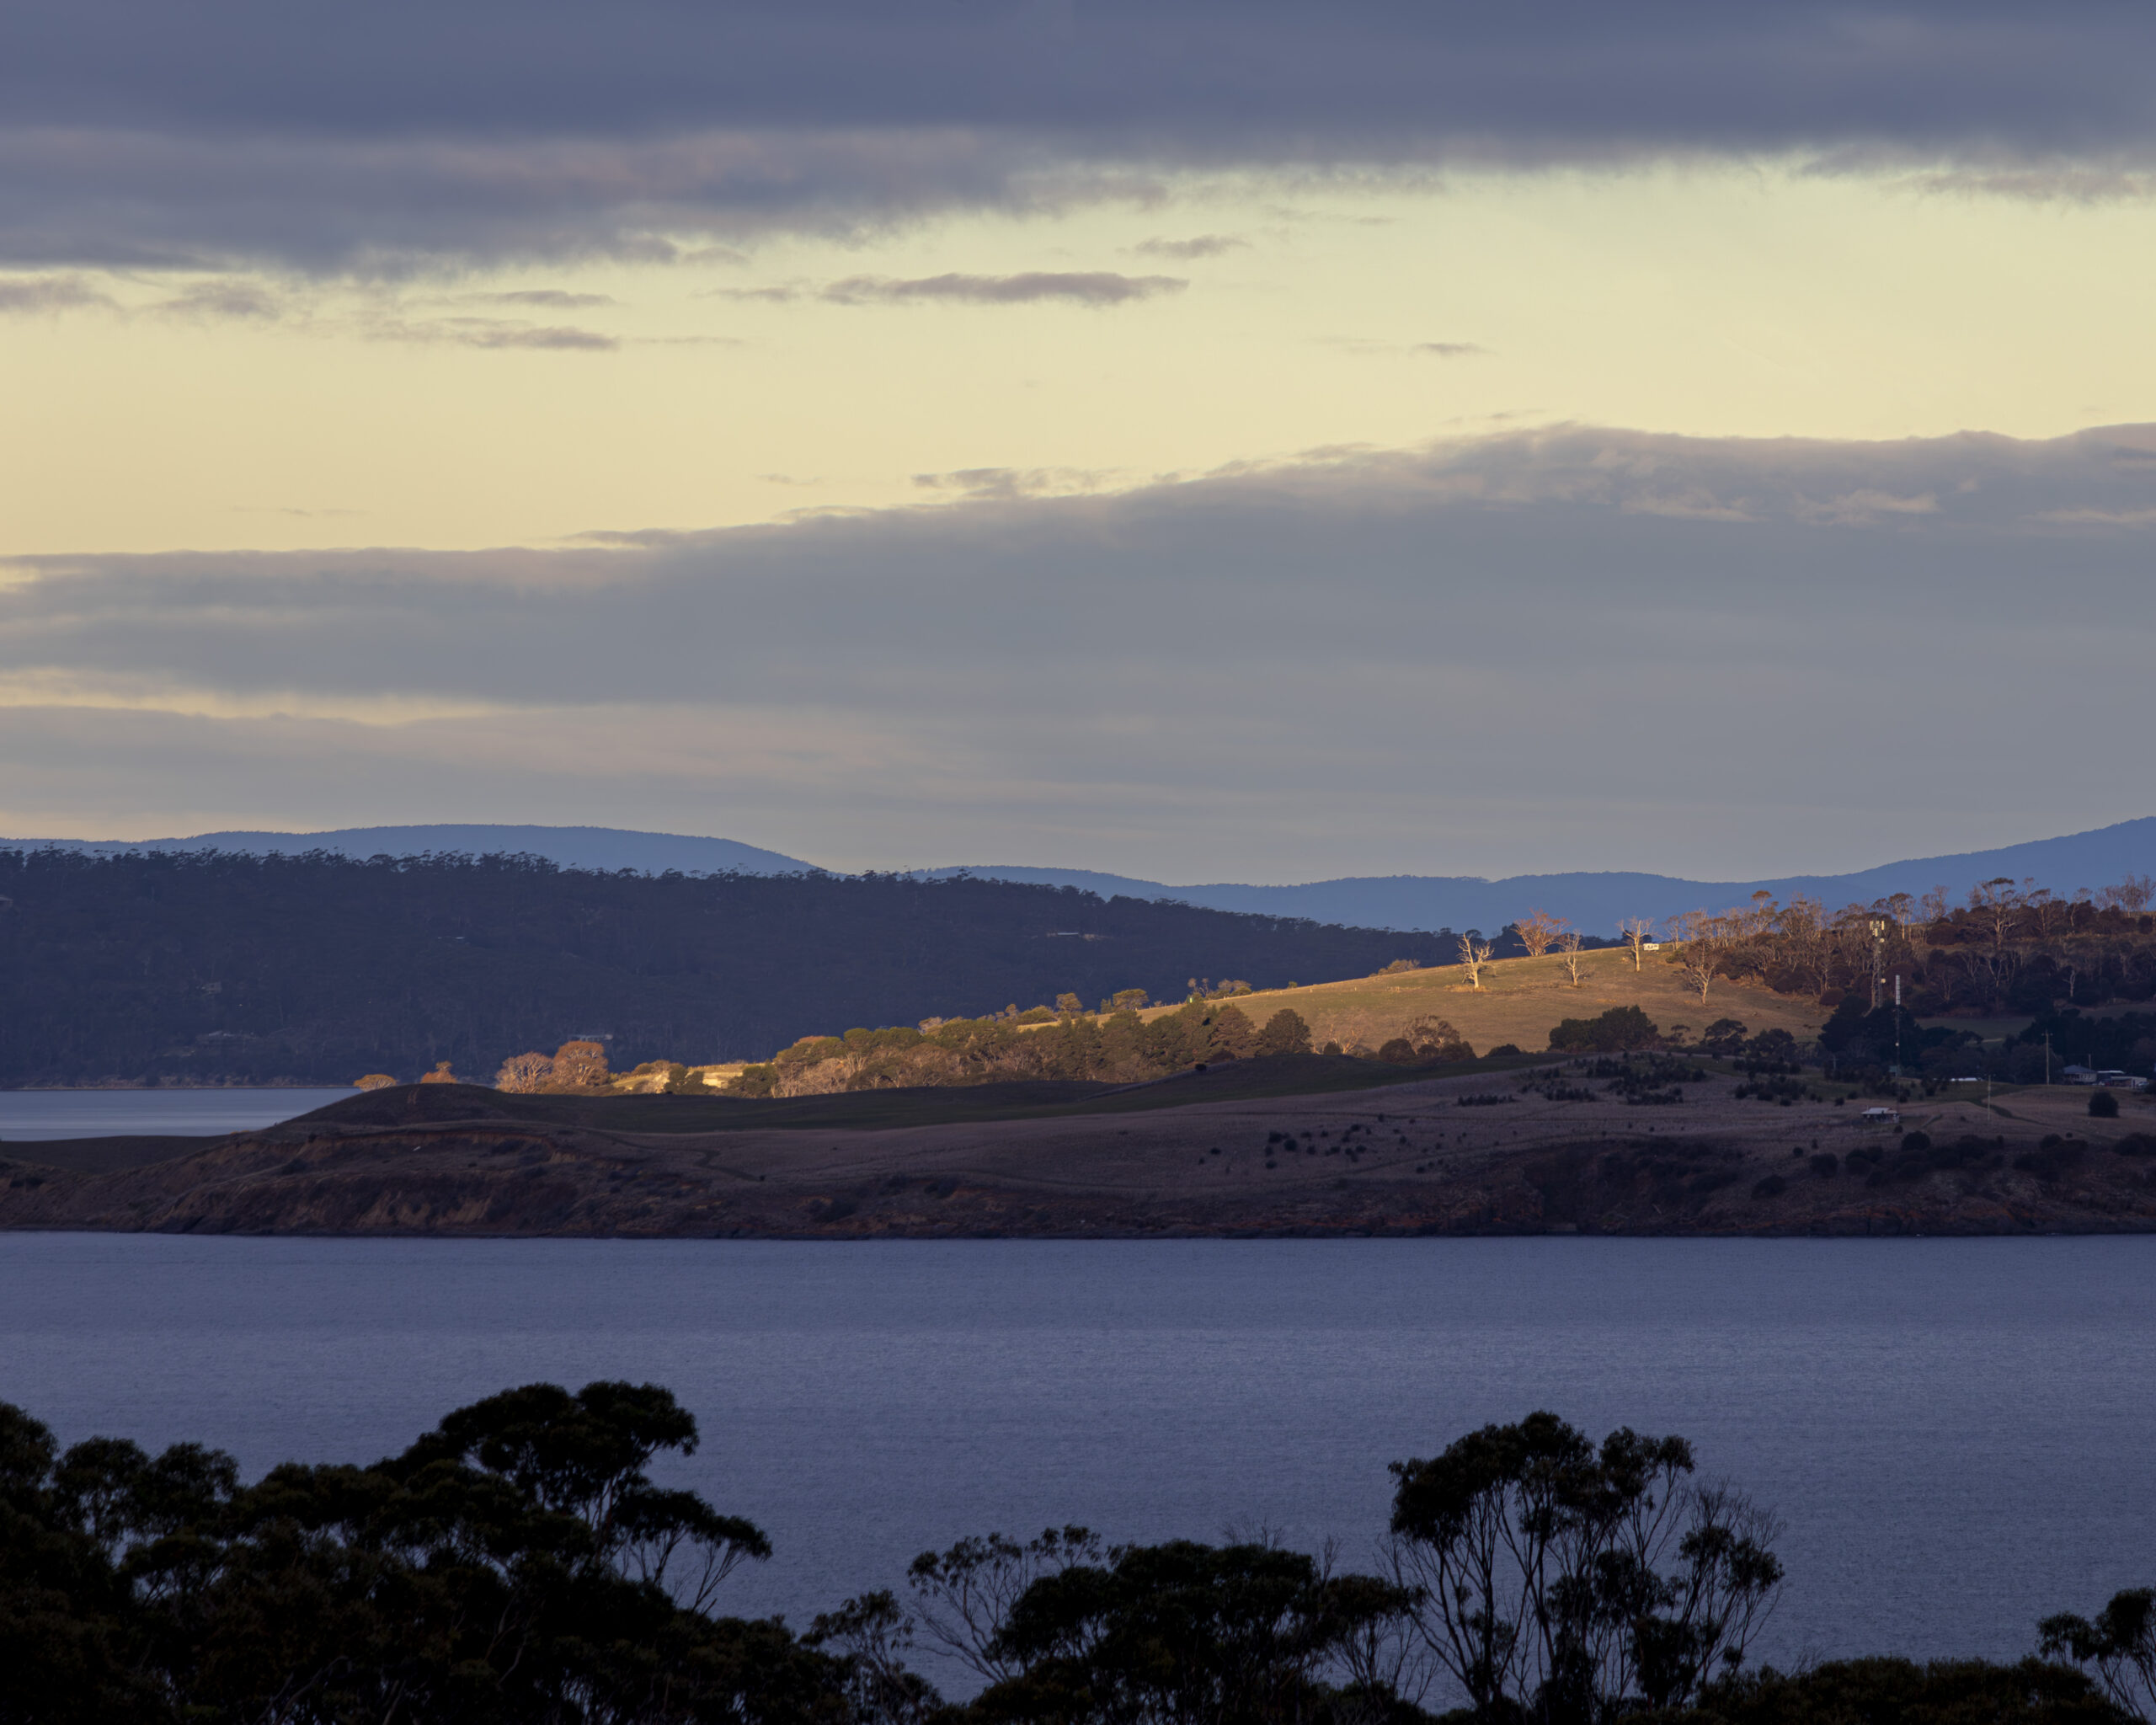 A view across a body of water to part of a hill that is lit up in late afternoon light. There are dark trees in the foreground